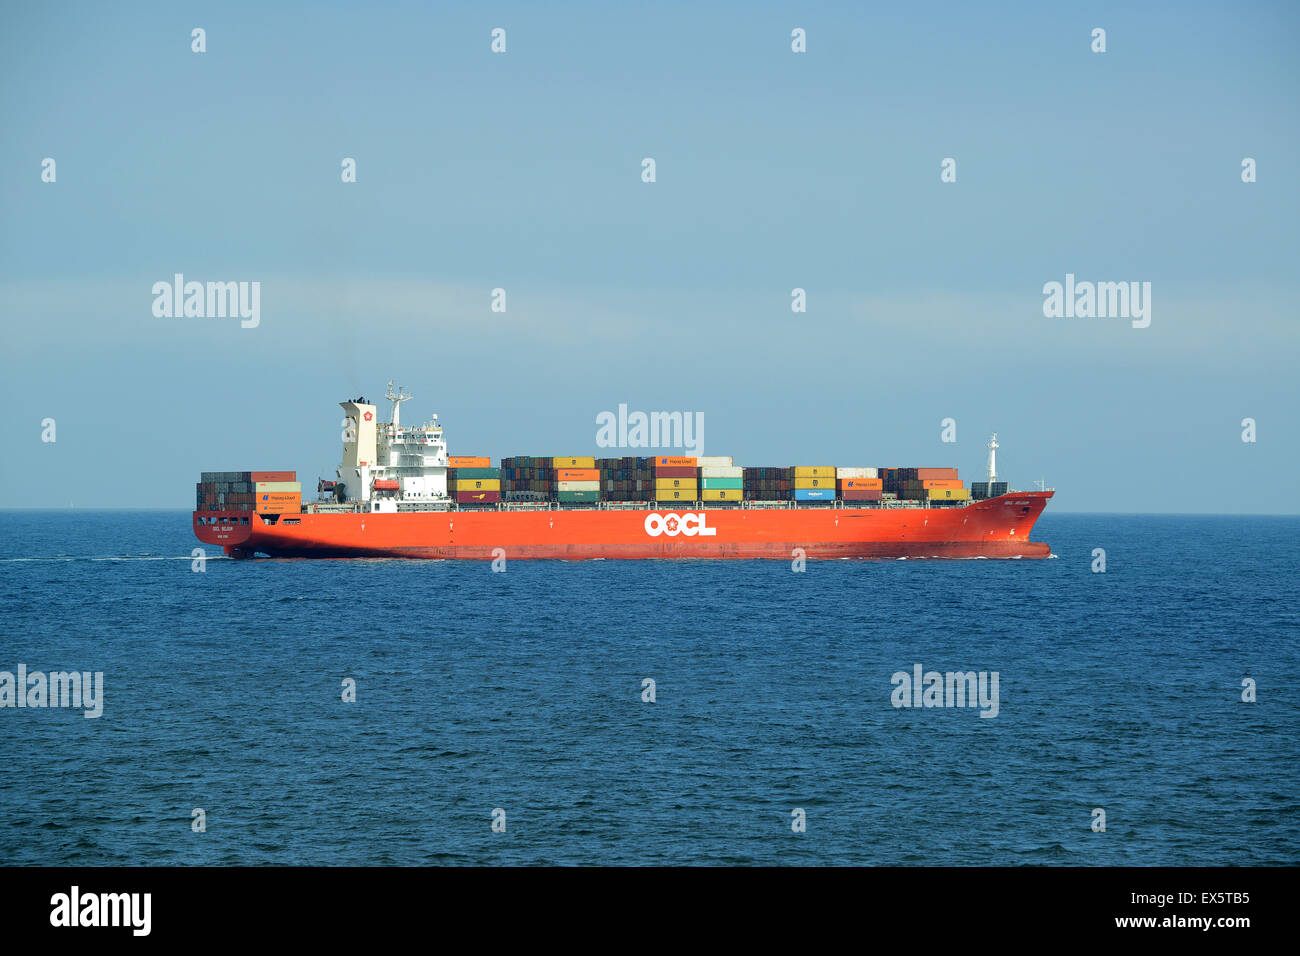 OOCL freight cargo container ship crossing the English channel uk Stock Photo